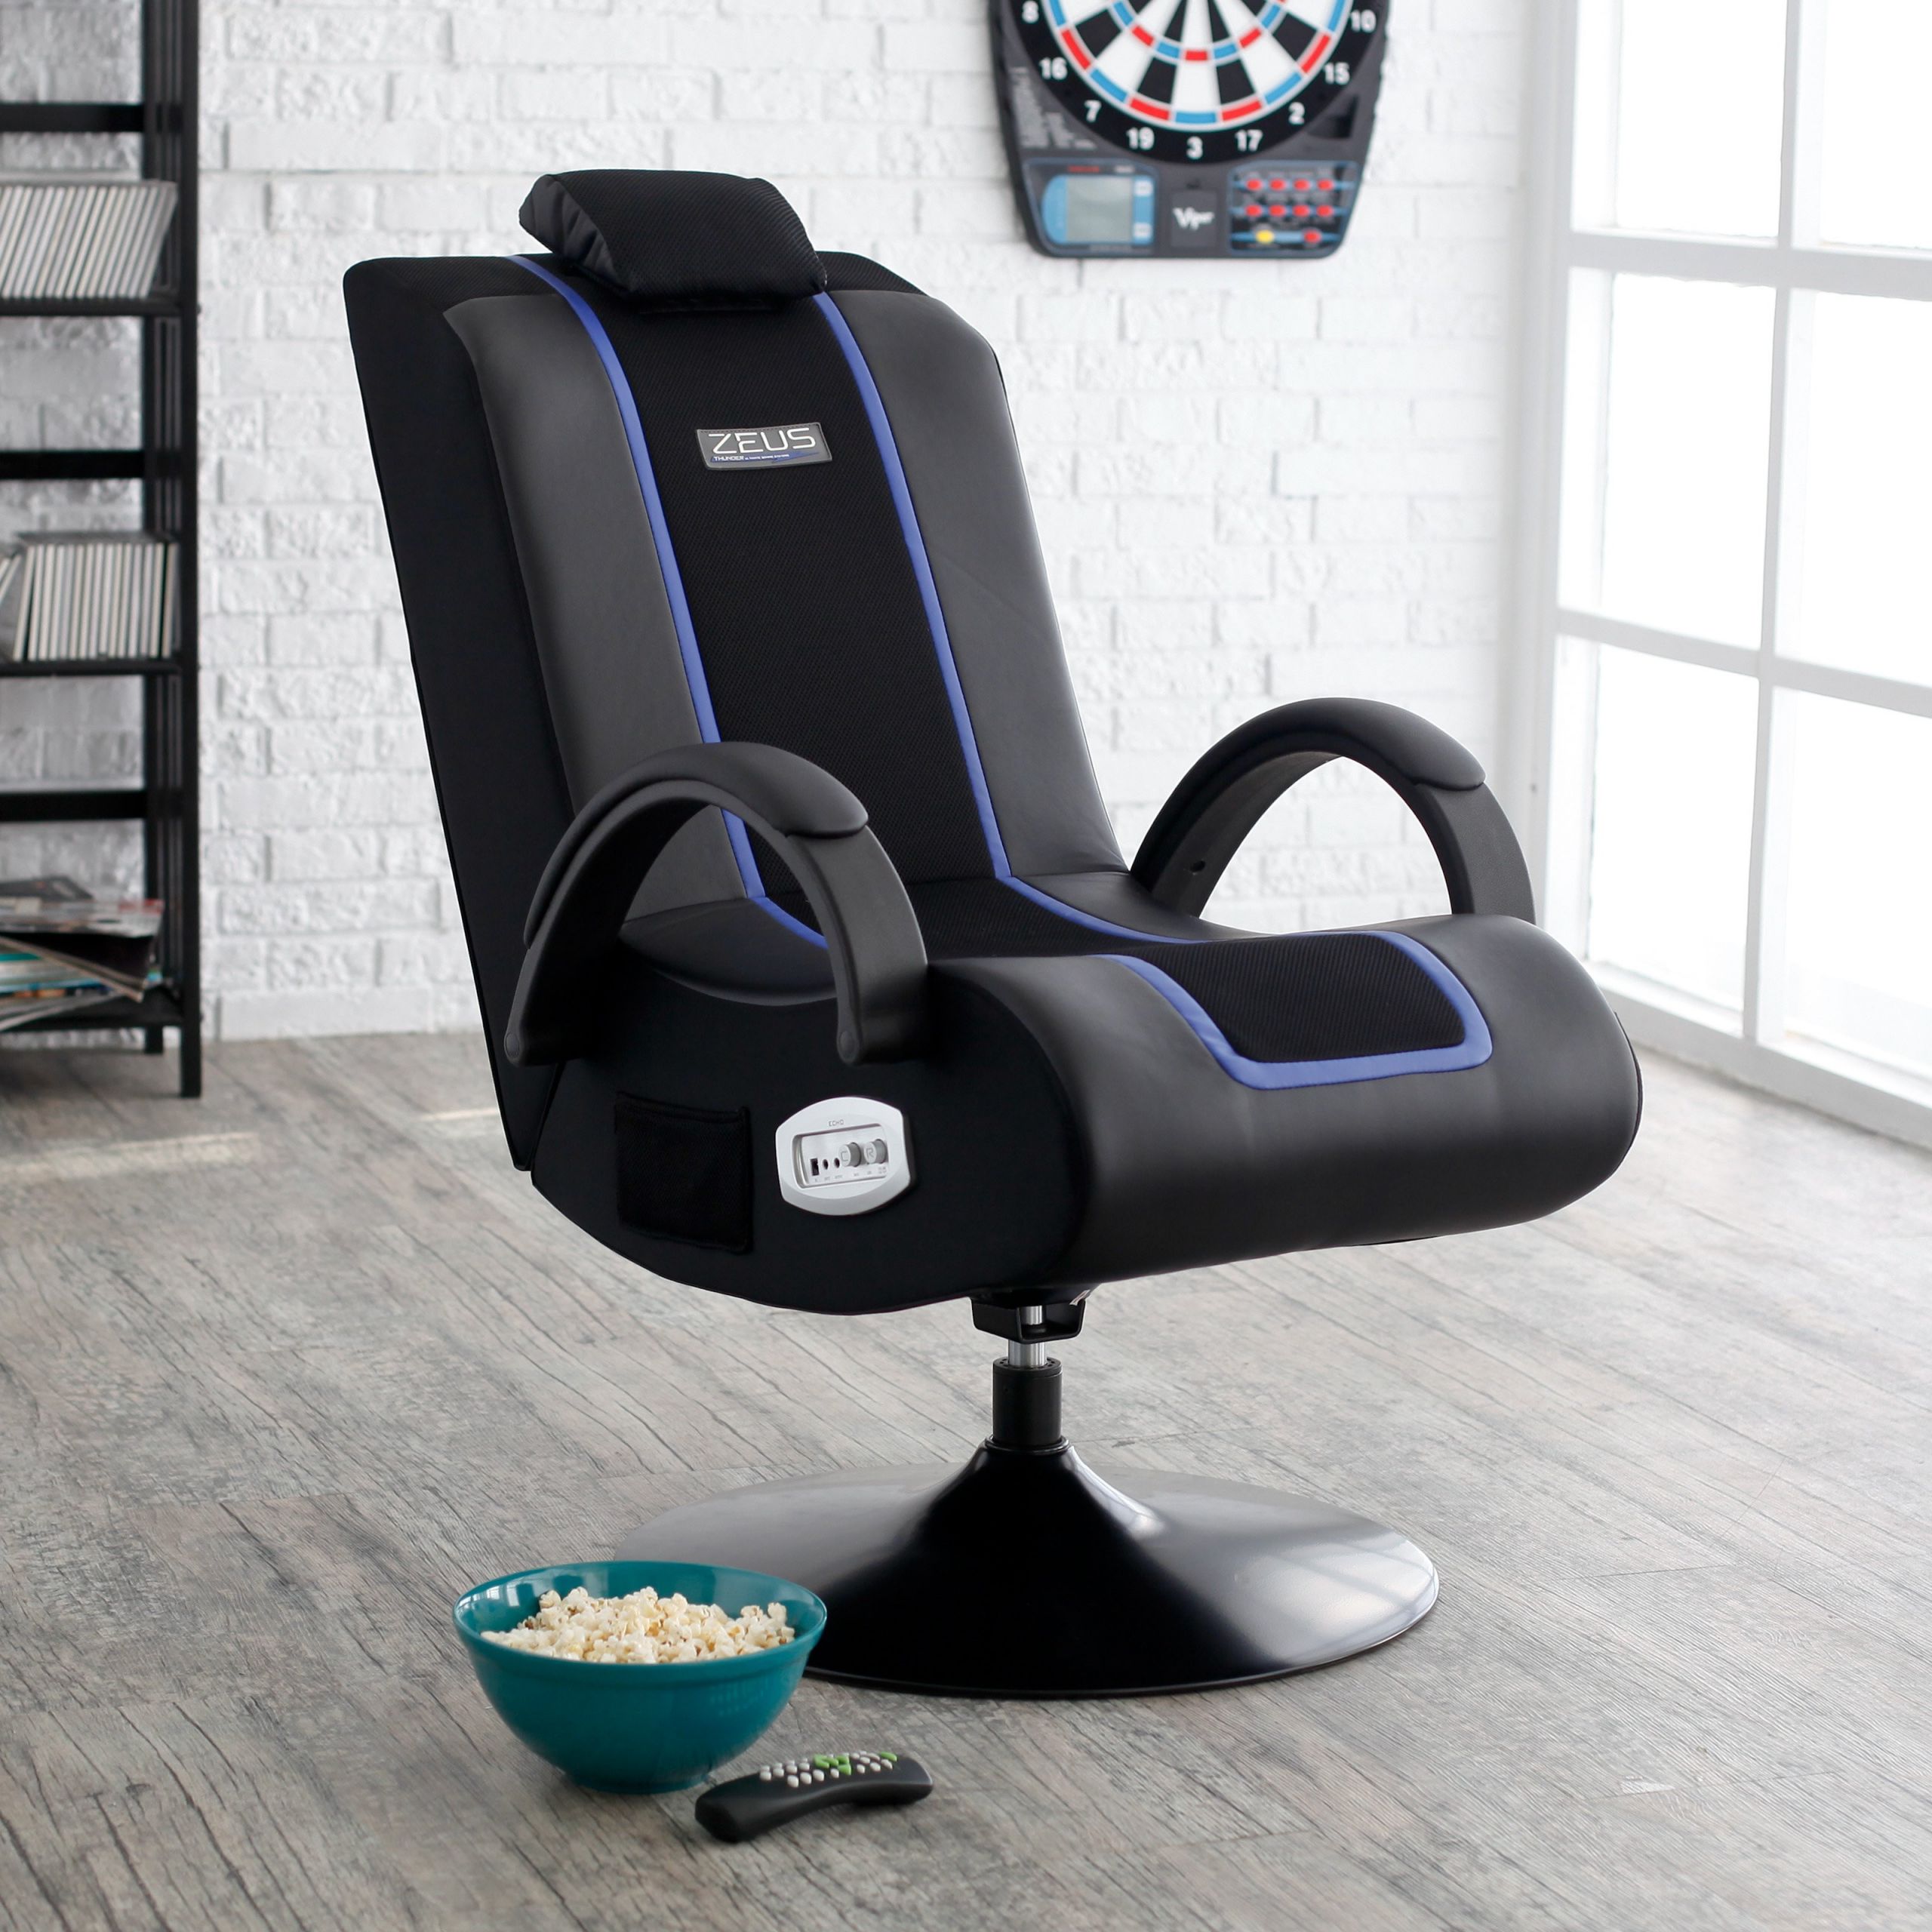 Game Chair For Kids
 Zeus Thunder Echo Video Game Chair at Hayneedle